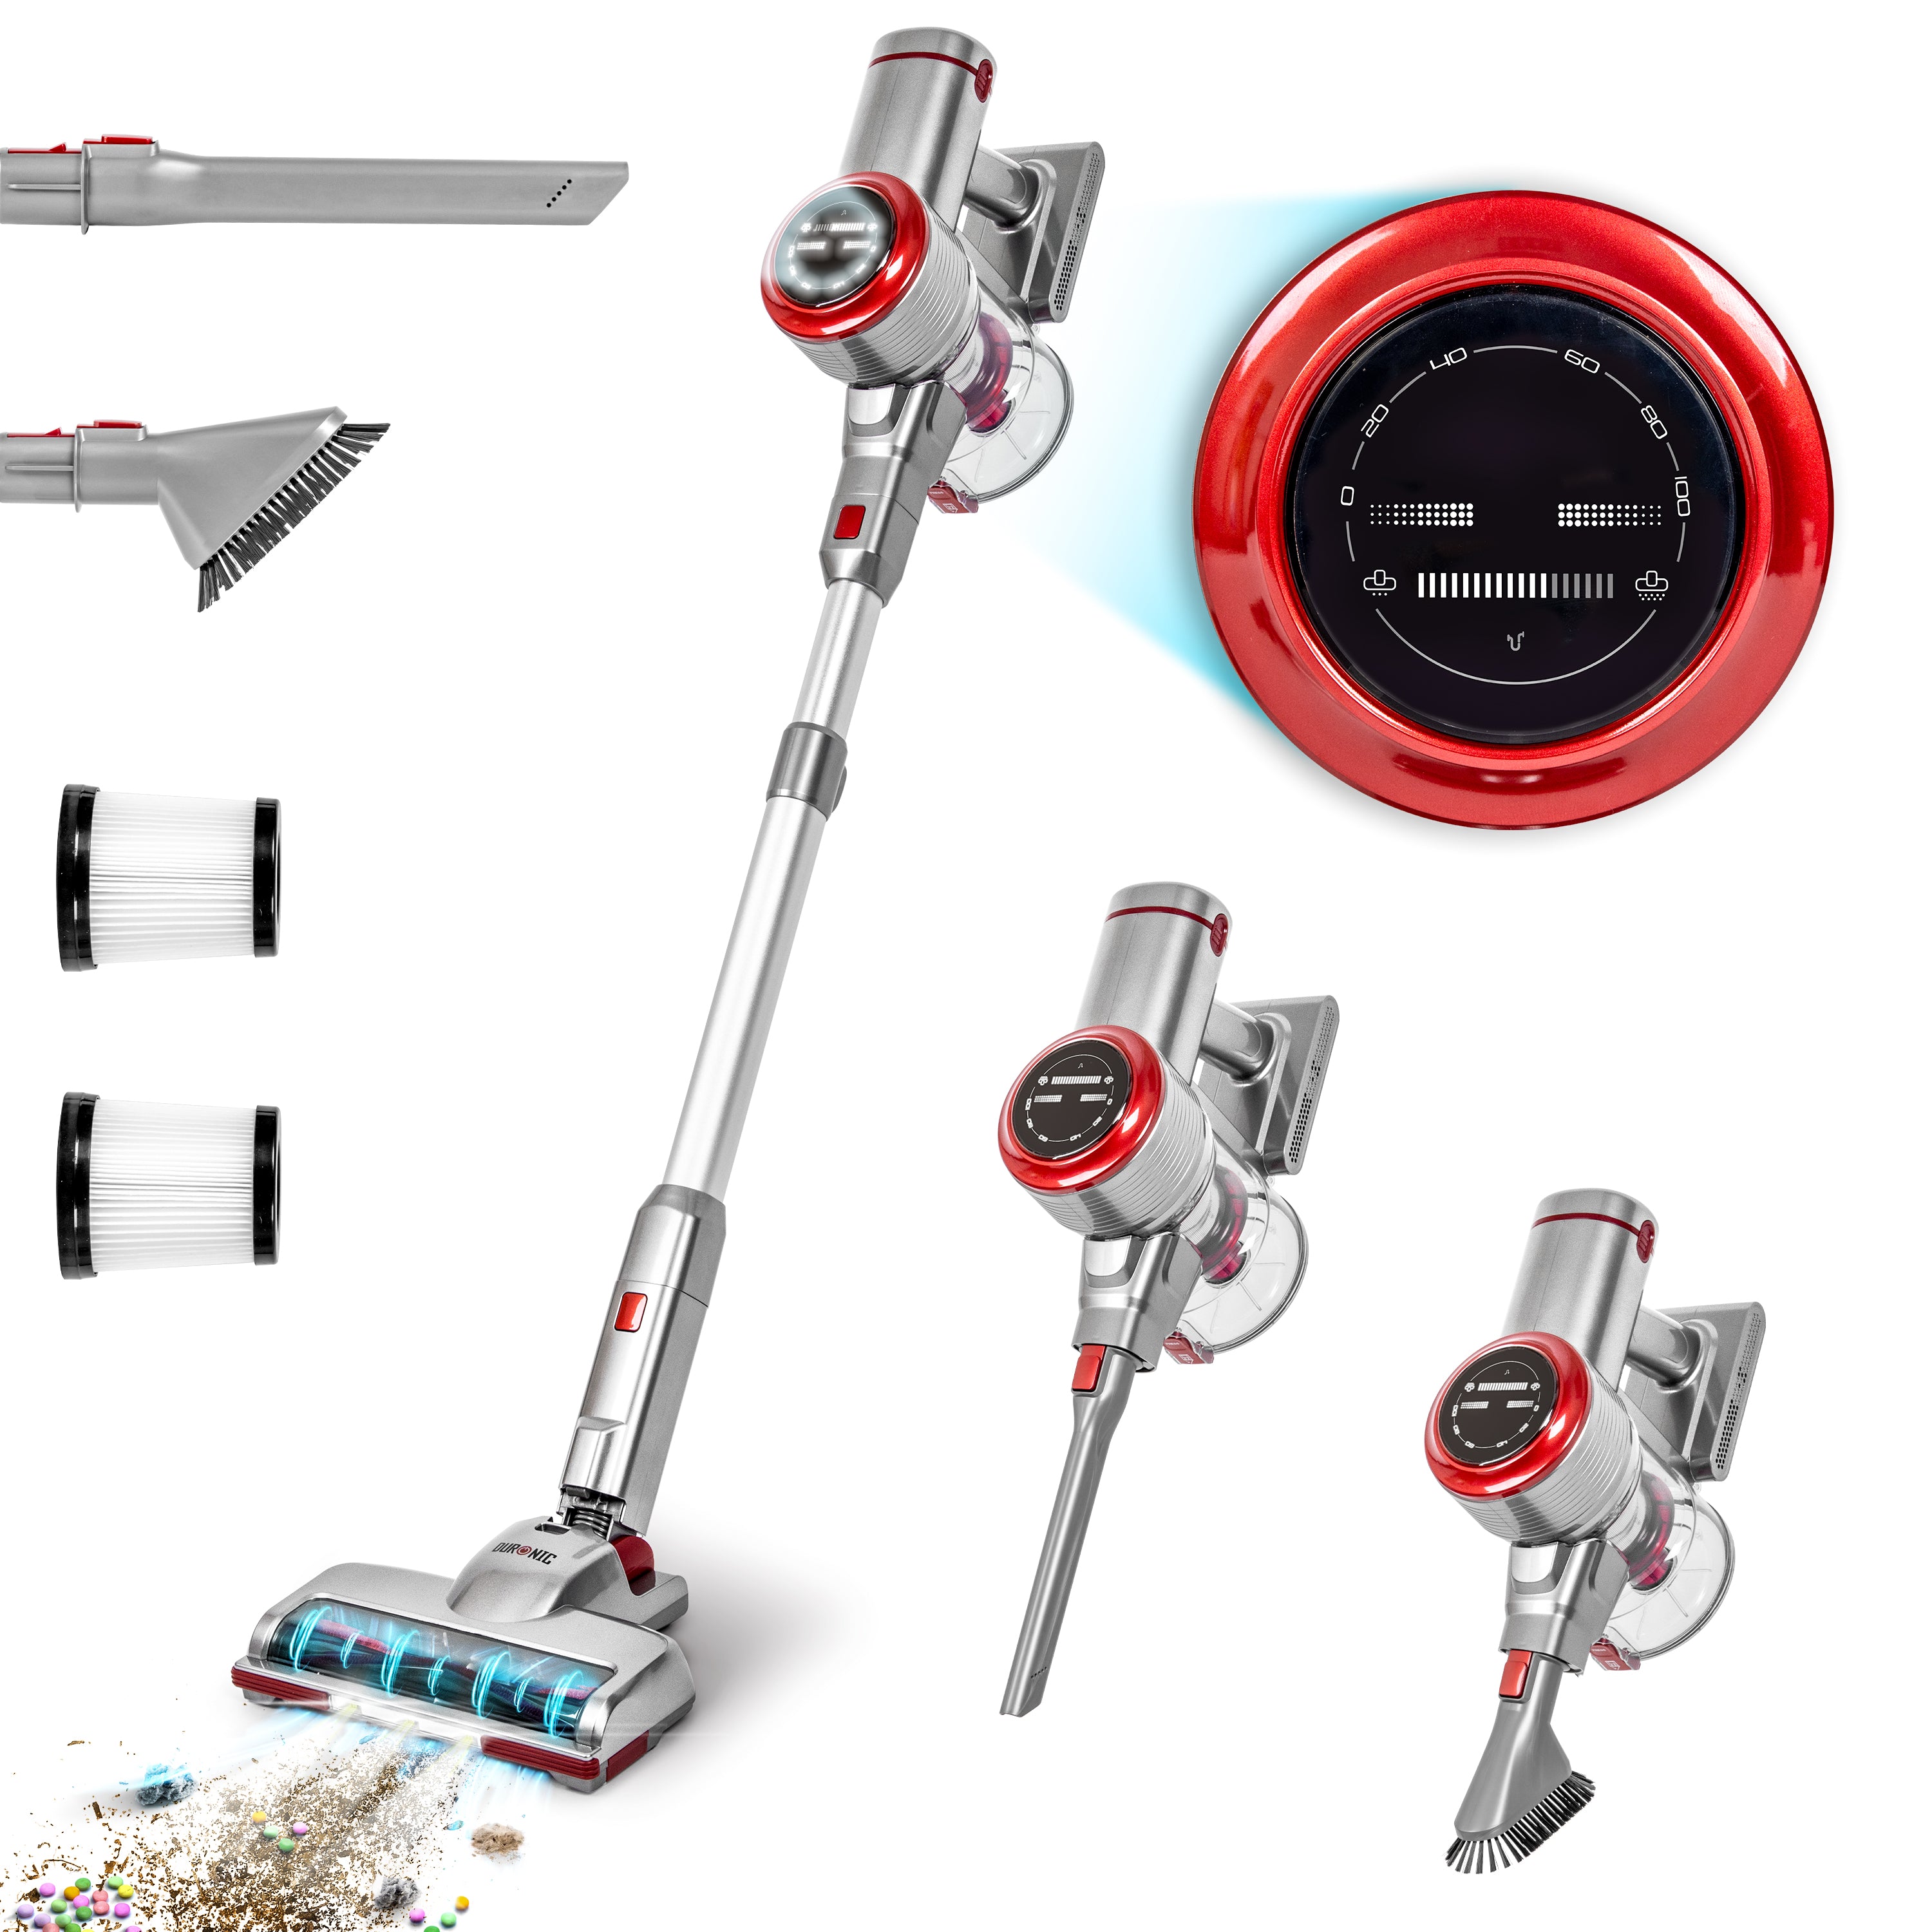 Duronic Cordless Vacuum VC24 [with 1 Battery] Stick Vacuum Cleaner, Self-Standing Lightweight Vacuum for Carpet/Hard Floors, Adjustable Suction Power, HEPA Filter, 220W, Rechargeable Lithium Battery